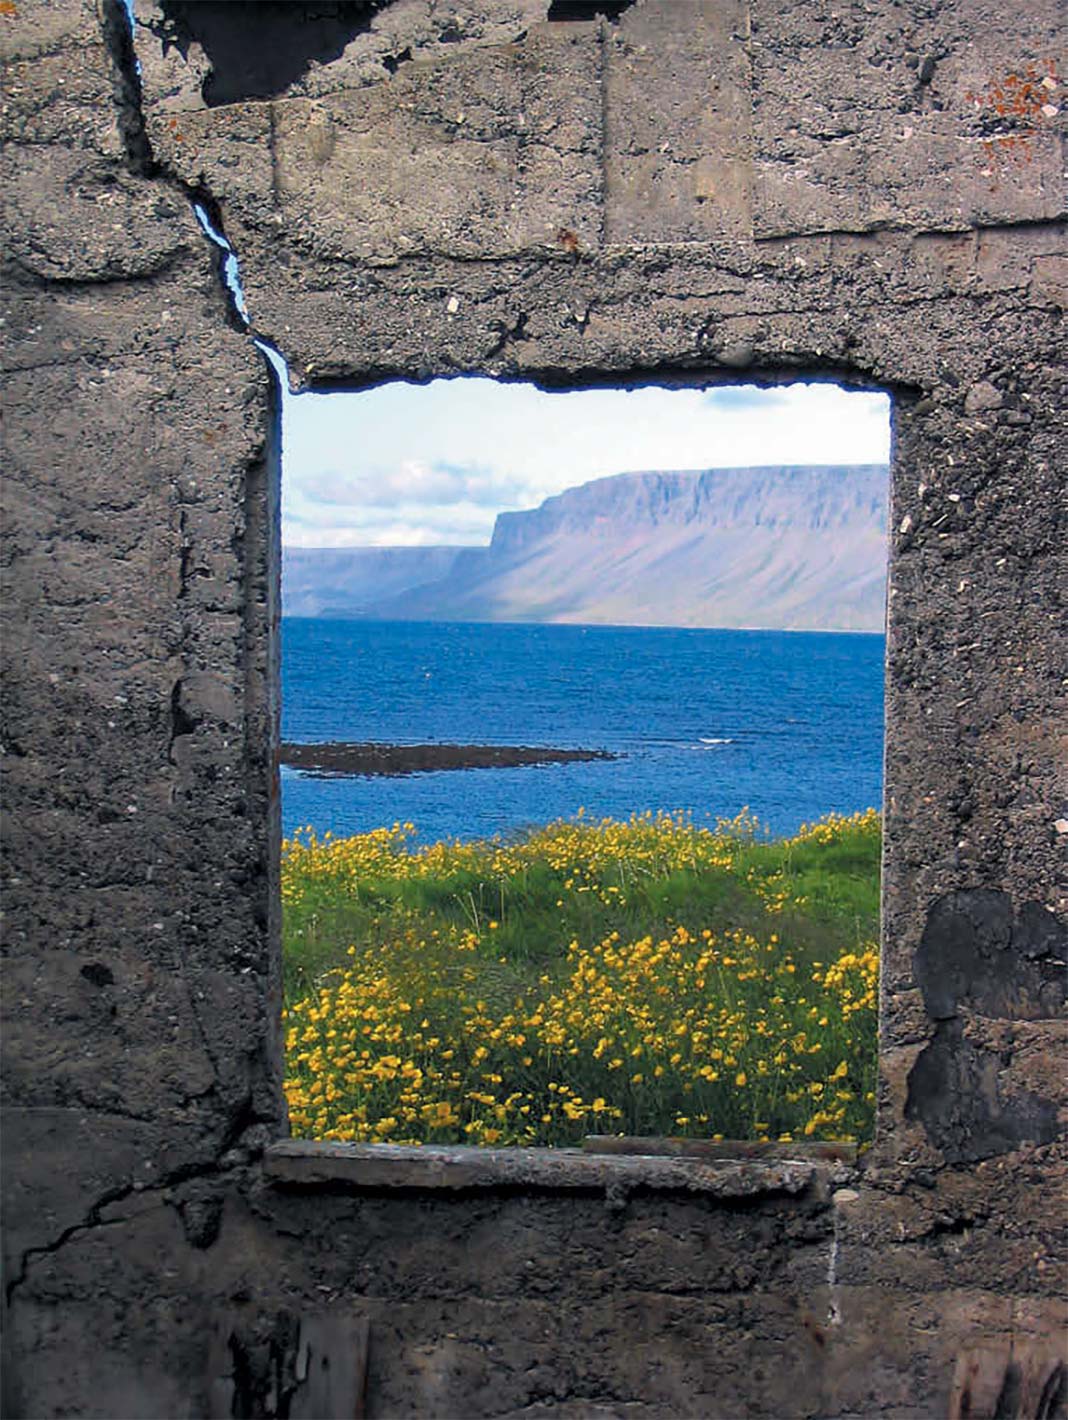 View out the window of stone ruins to the ocean, a fjord in background, and yellow field of flowers in foreground.